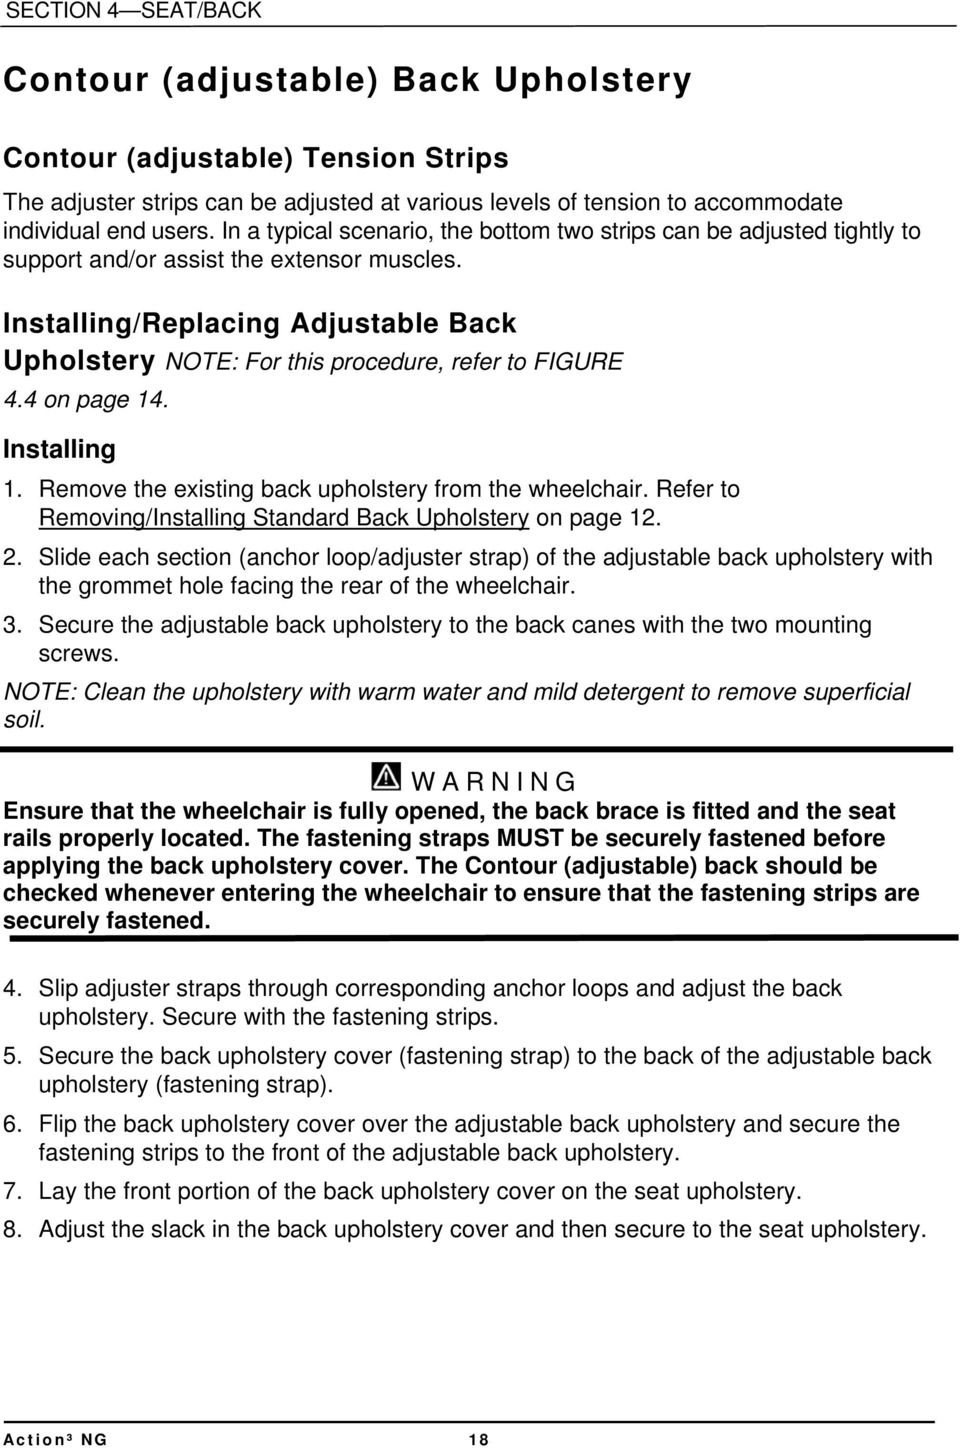 Installing/Replacing Adjustable Back Upholstery NOTE: For this procedure, refer to FIGURE 4.4 on page 14. Installing 1. Remove the existing back upholstery from the wheelchair.